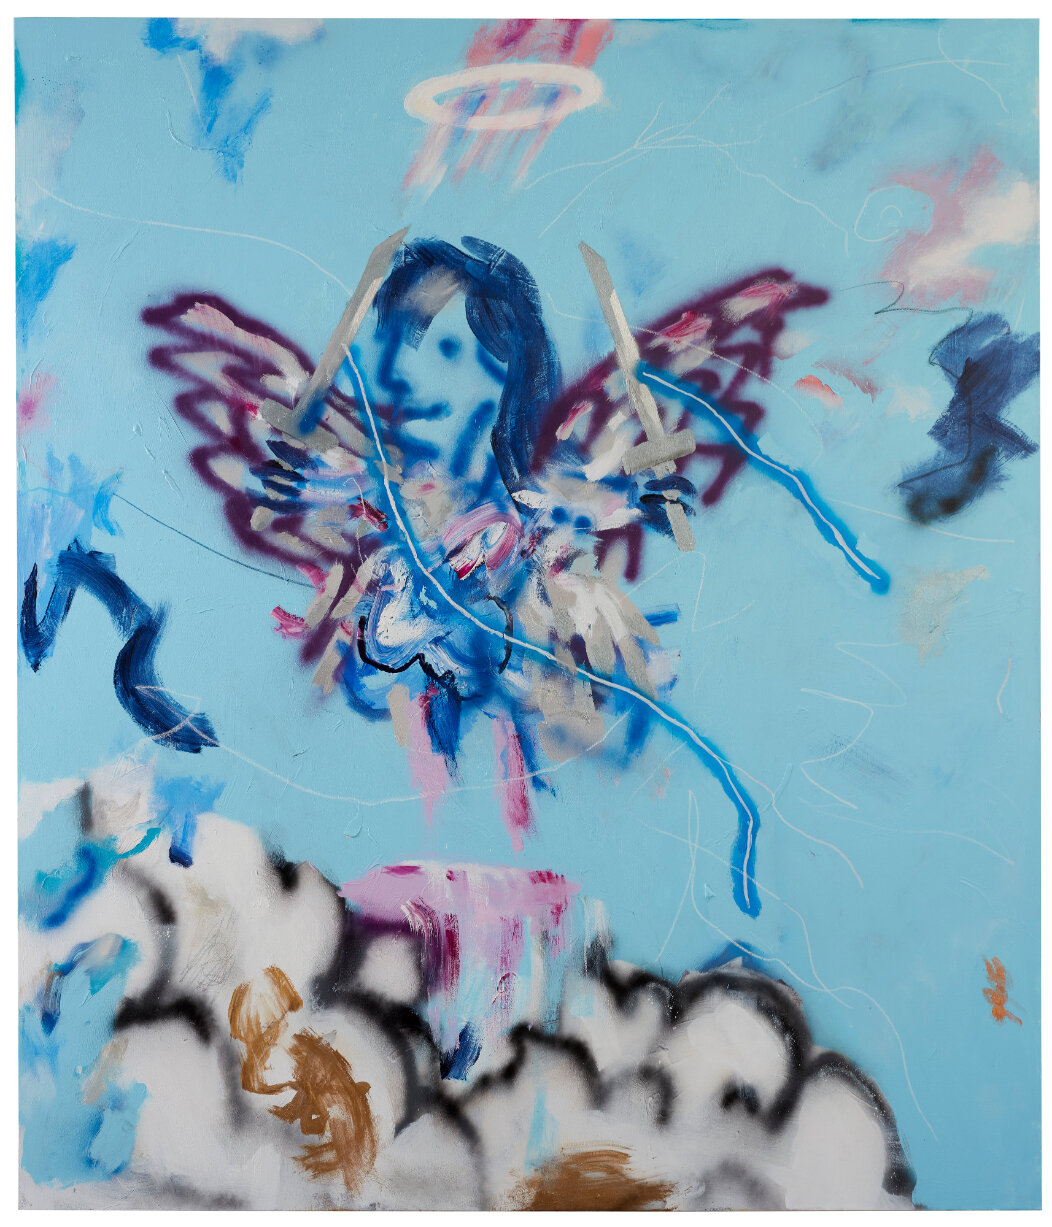  Robert Nava  Cloud Rider Angel , 2020 Acrylic and grease pencil on canvas 85 x 73 inches (215.9 cm x 185.4 cm) 